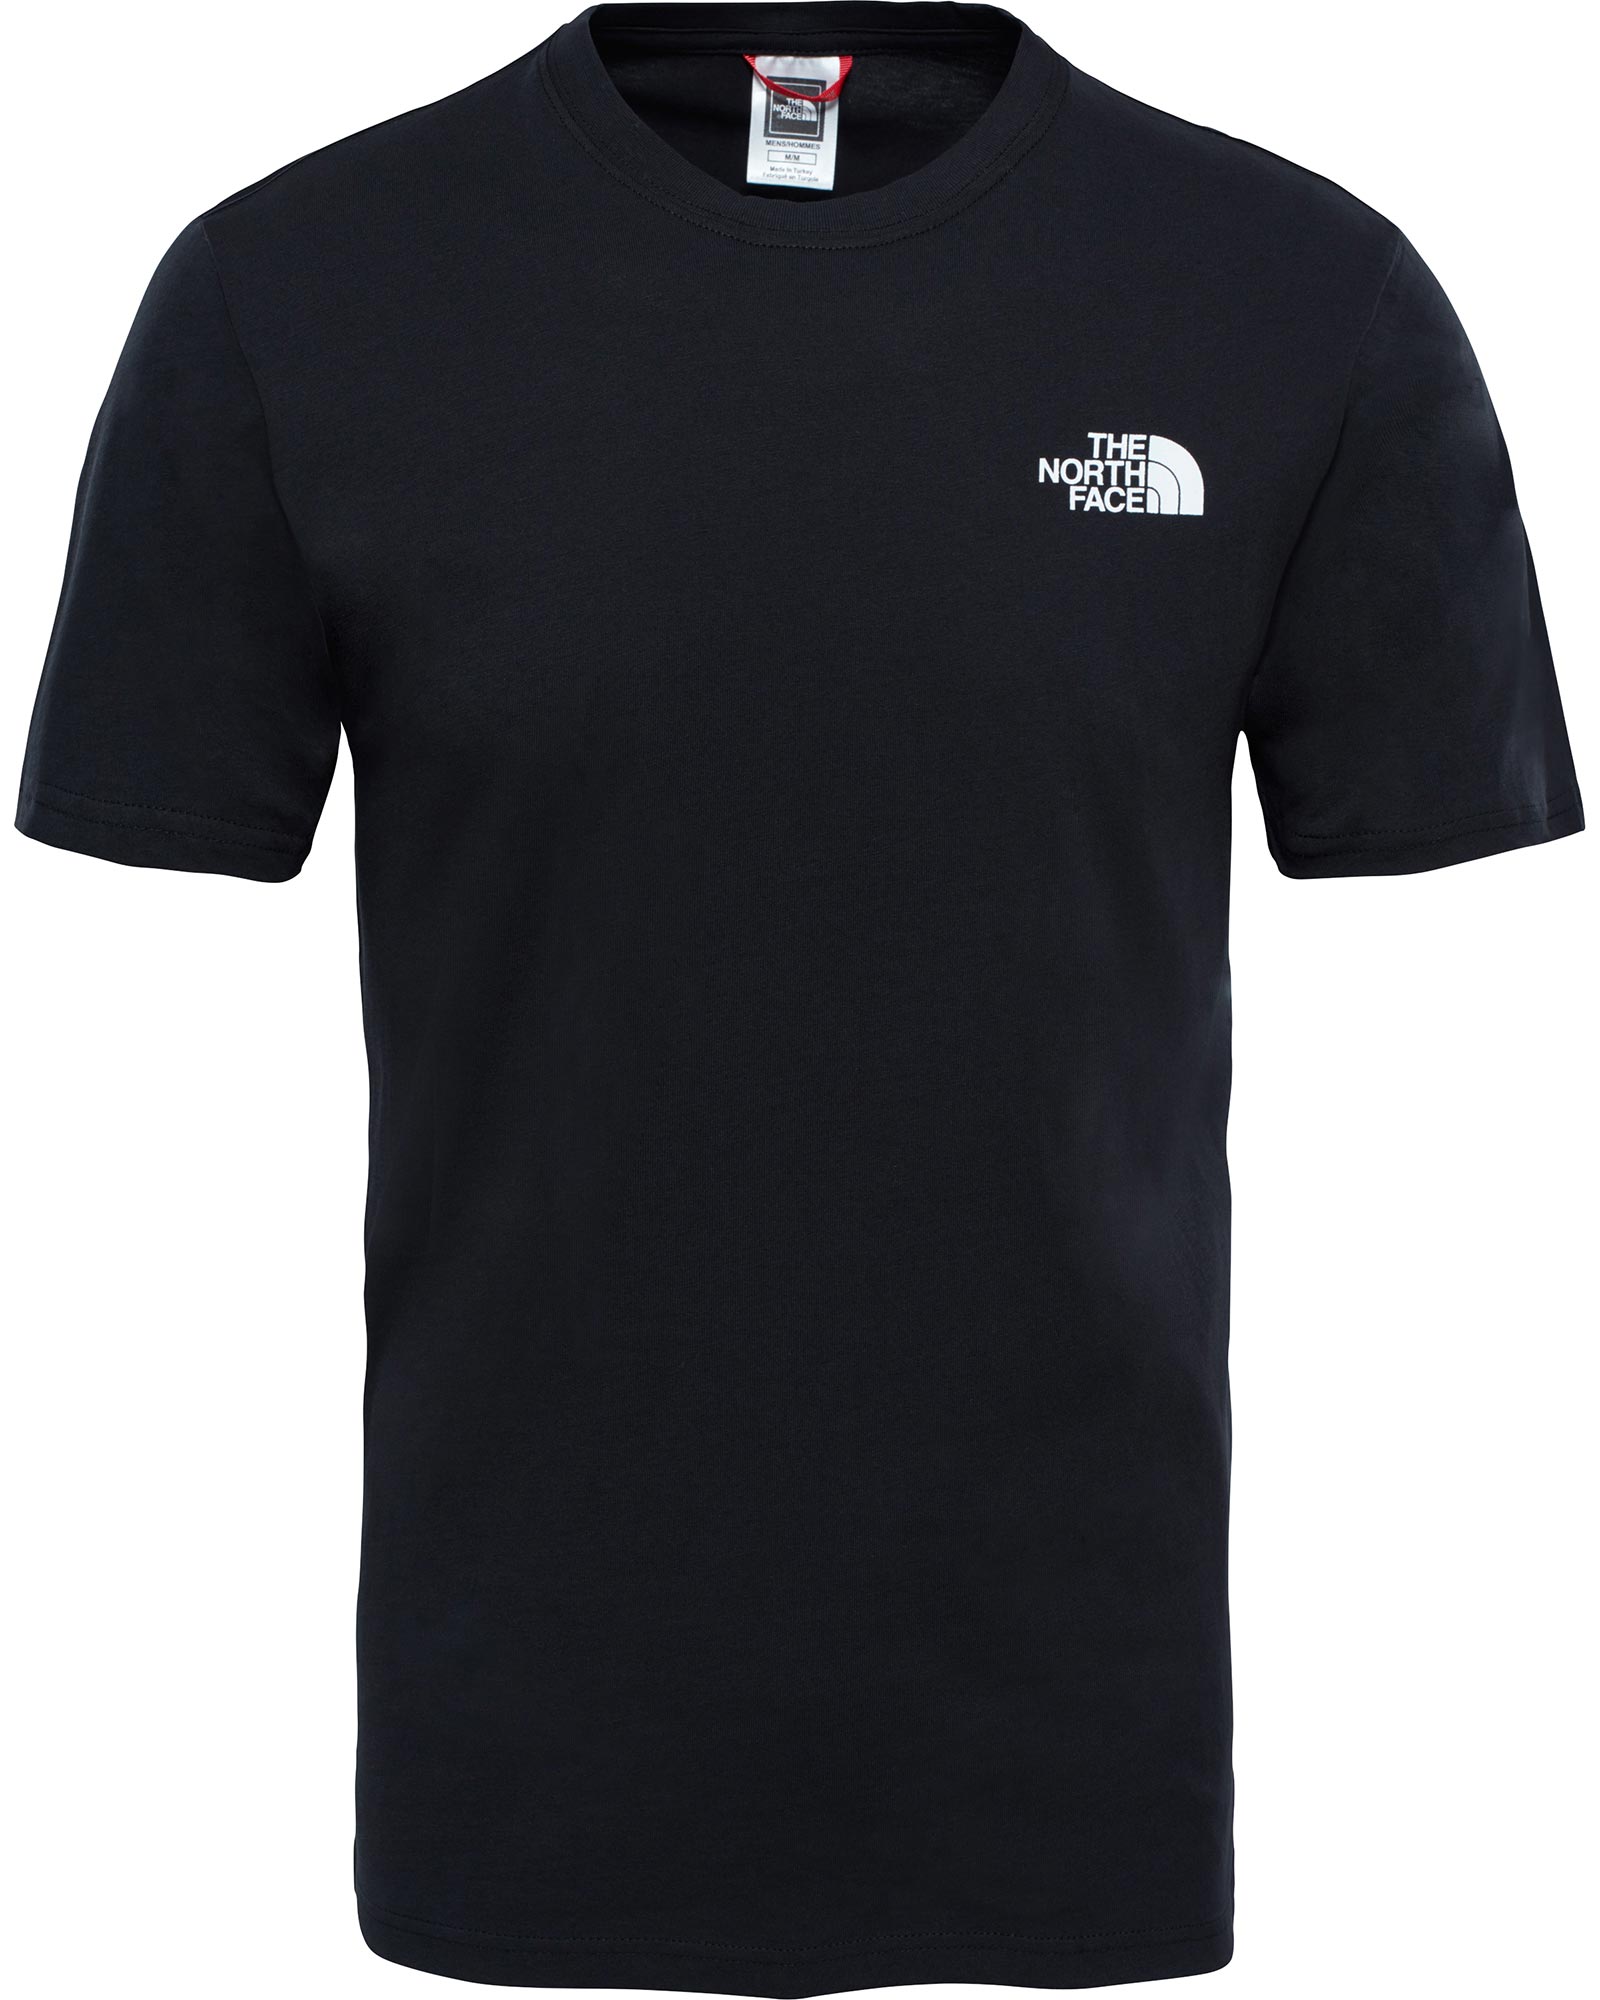 The North Face Red Box Mens T-shirt